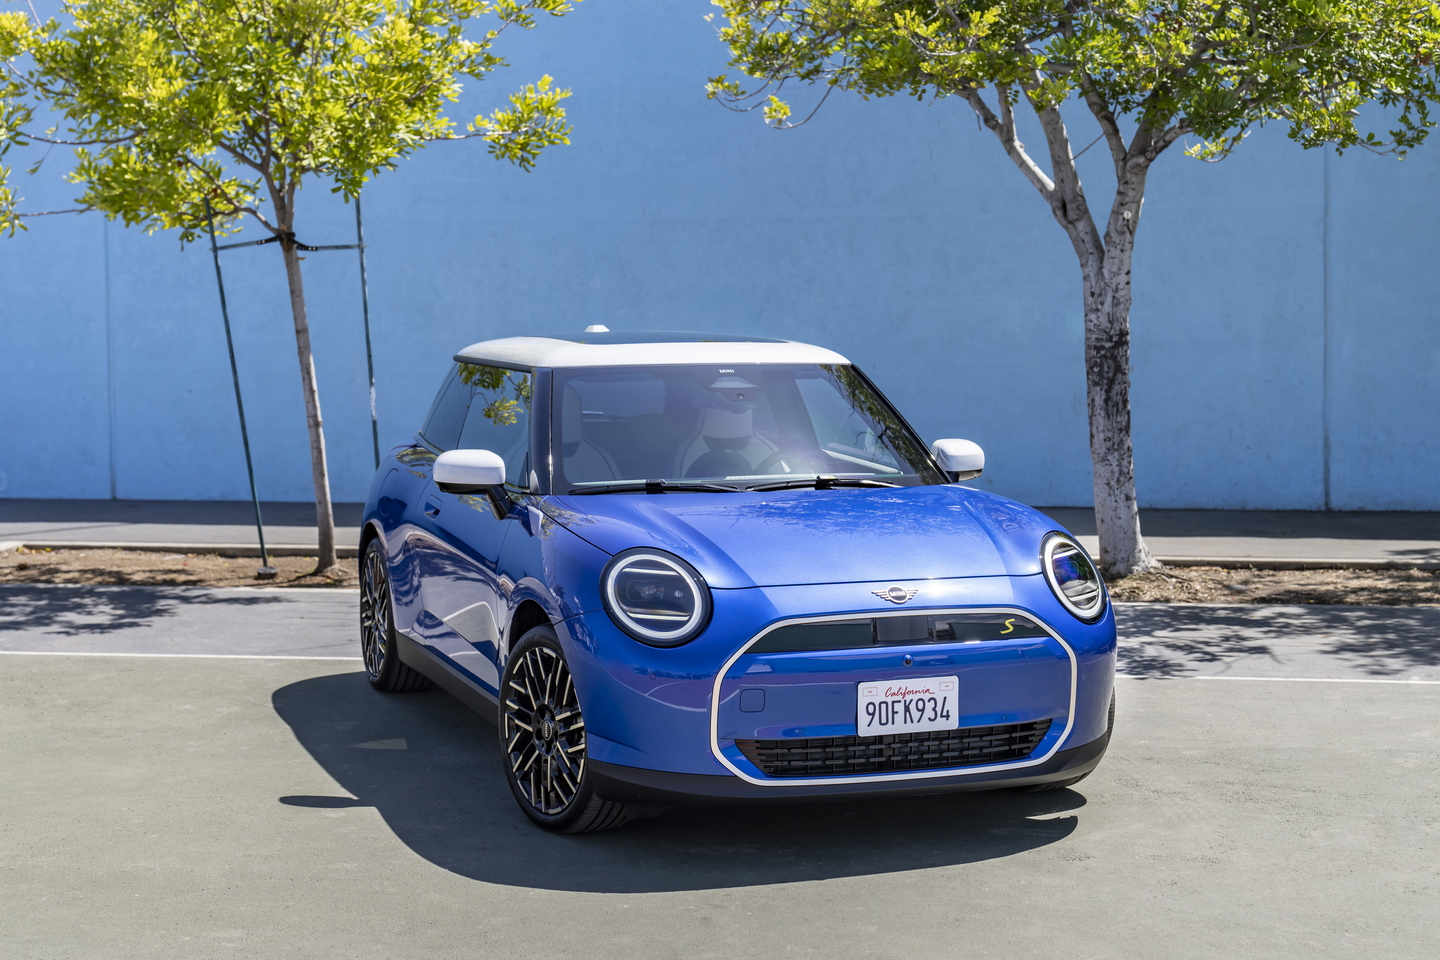 city cars, electric cars, hatch, mini, mini cooper, spyshot, superminis, all-new electric mini spied during los angeles photoshoot